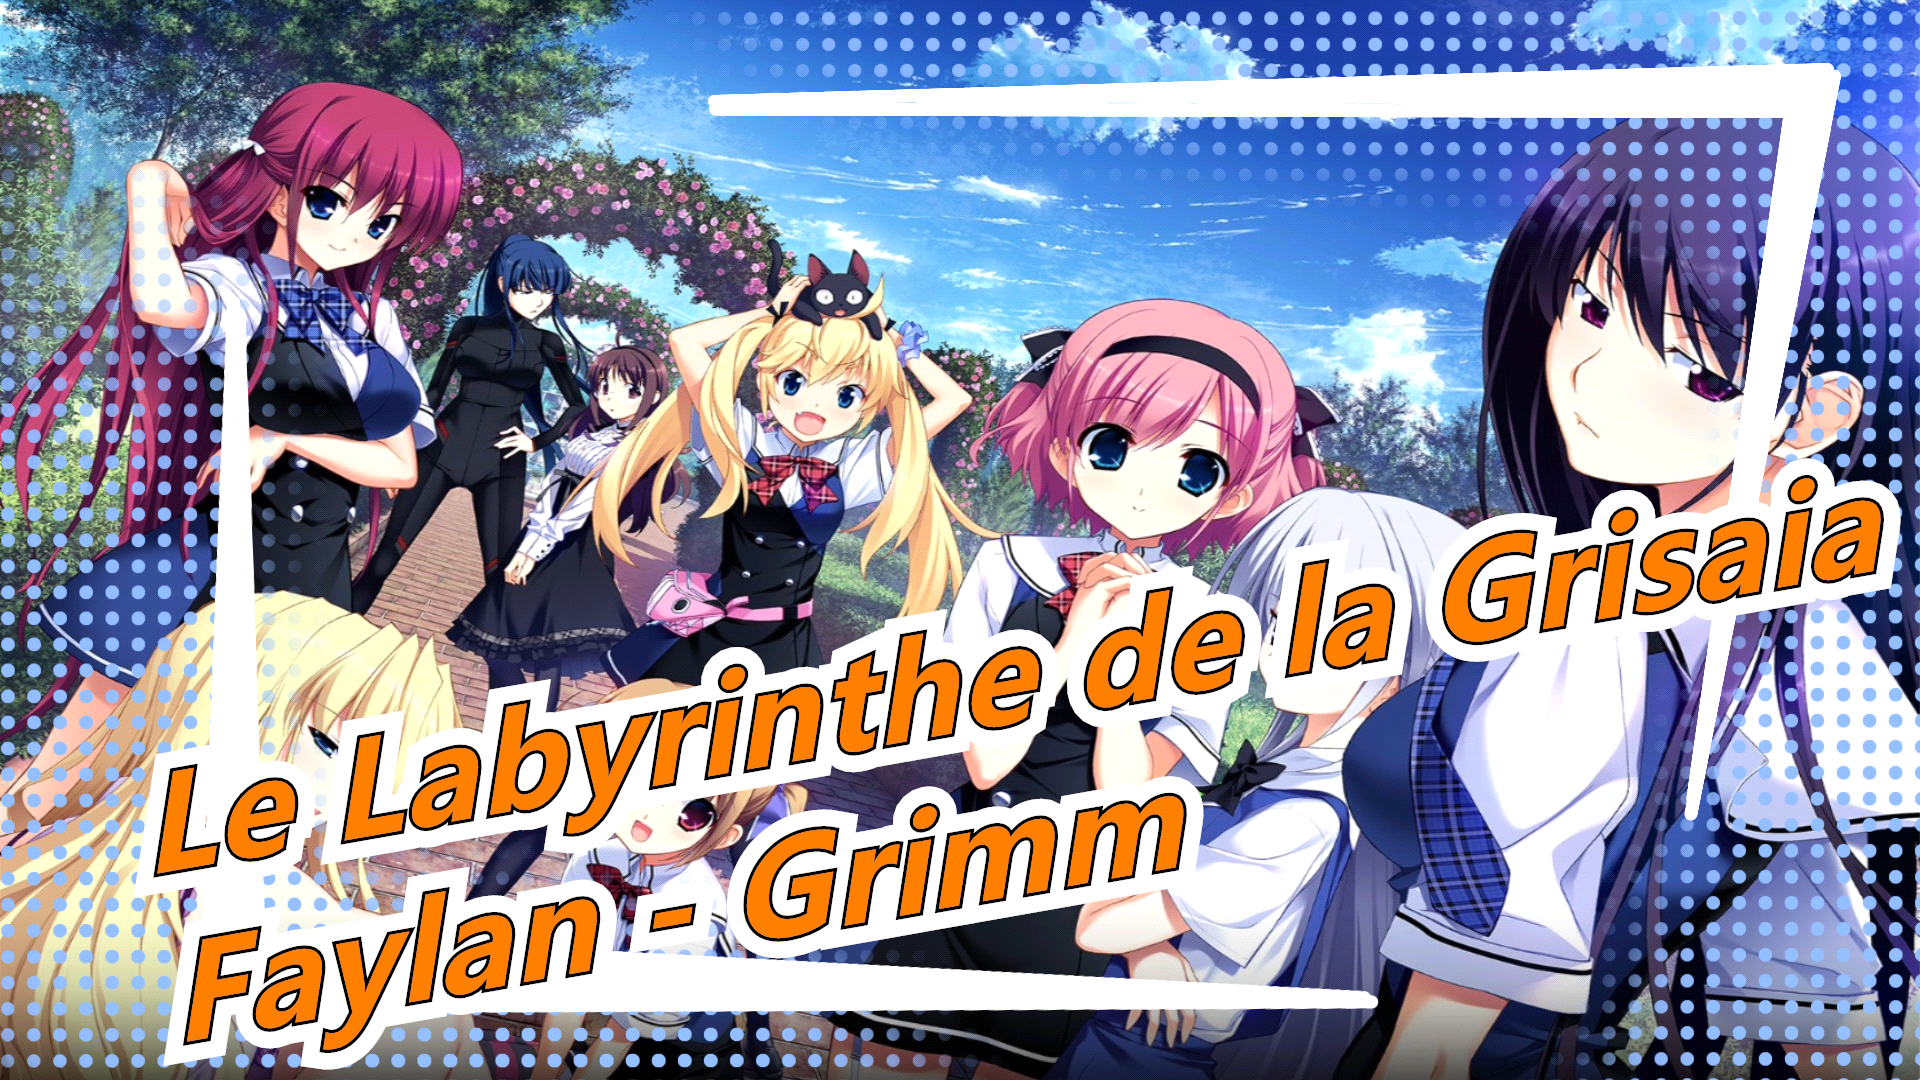 The labyrinth of grisaia anime credits